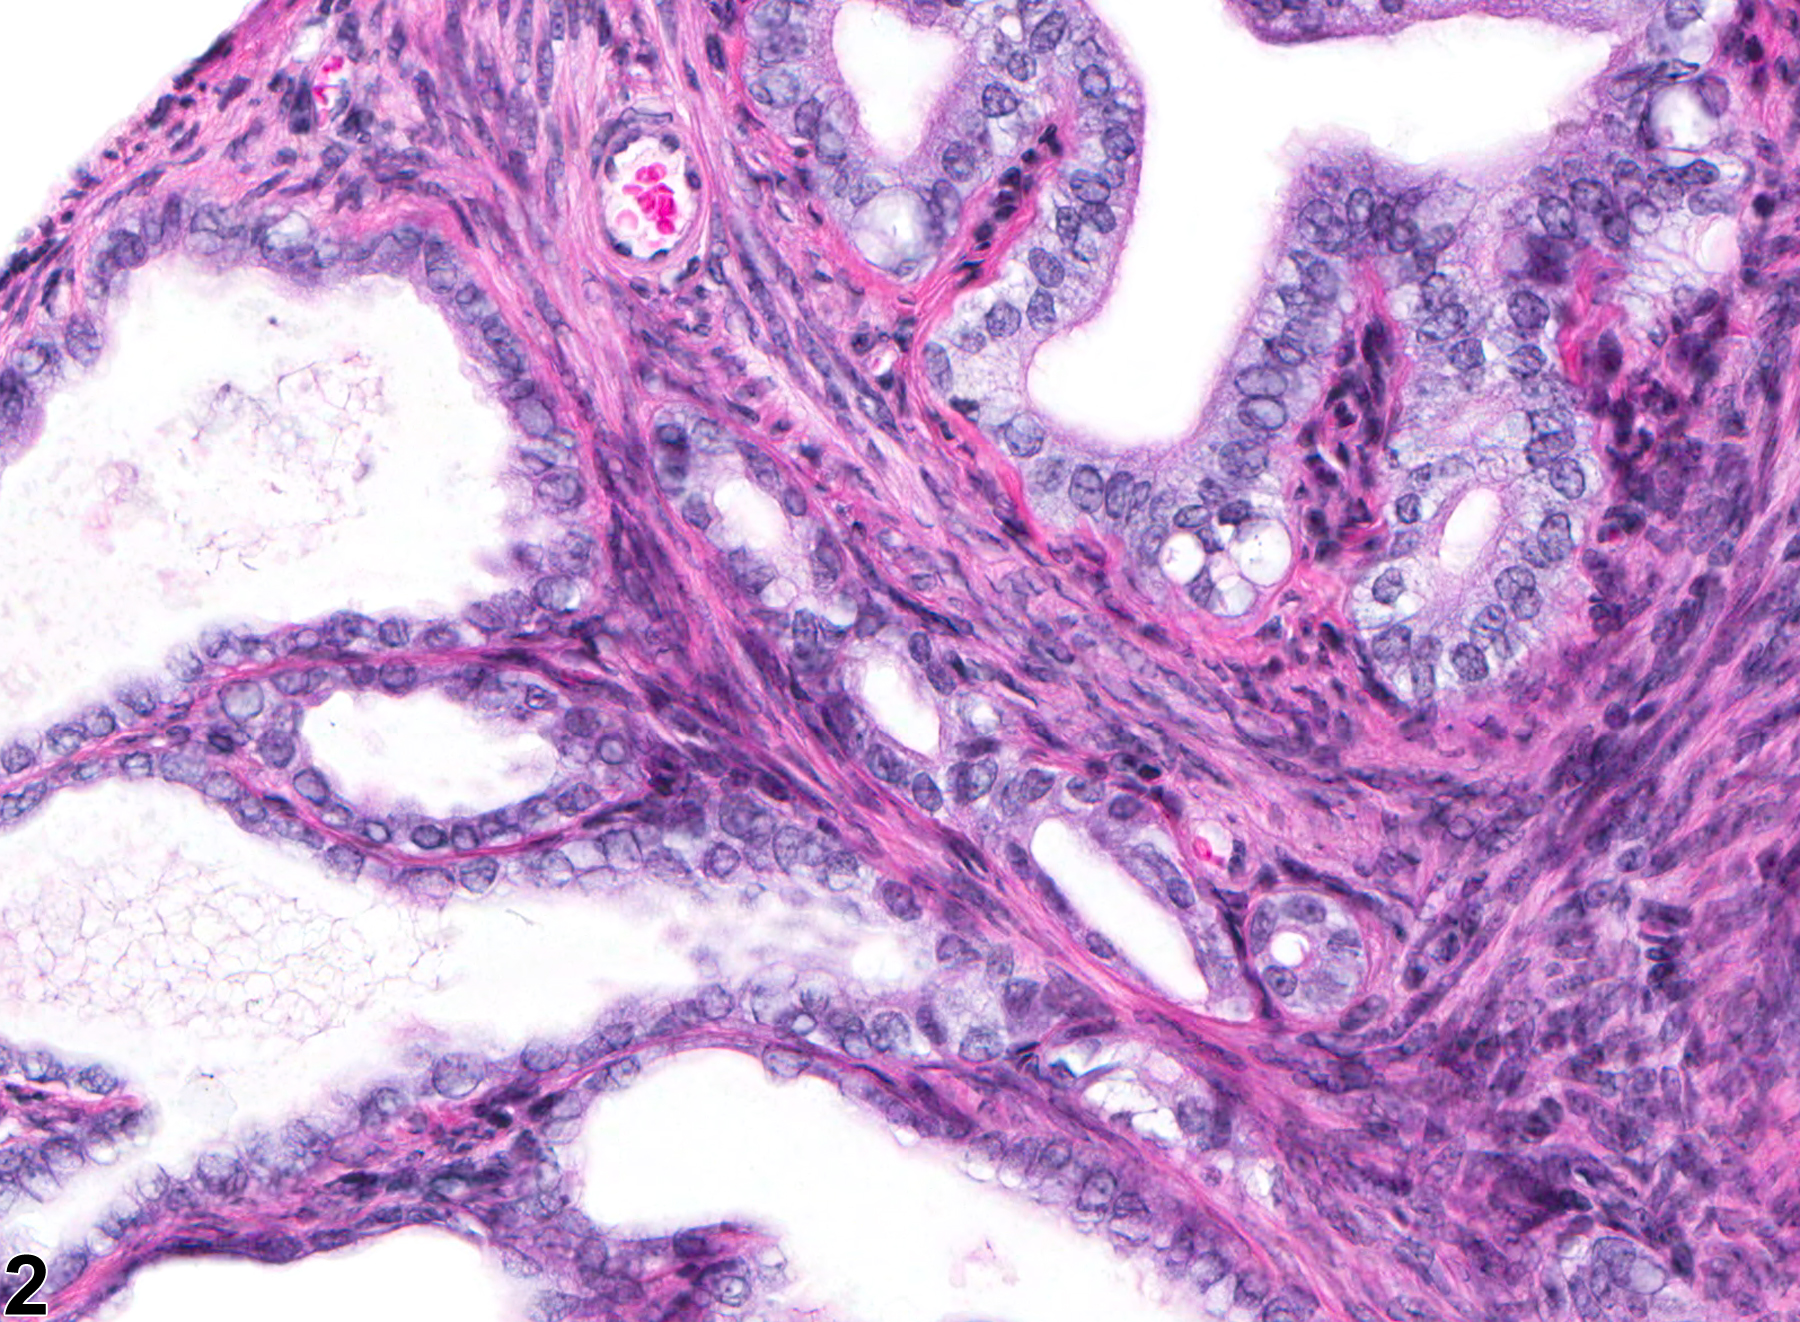 Image of mesonephric duct remnant in the oviduct from a female B6C3F1 mouse in a chronic study